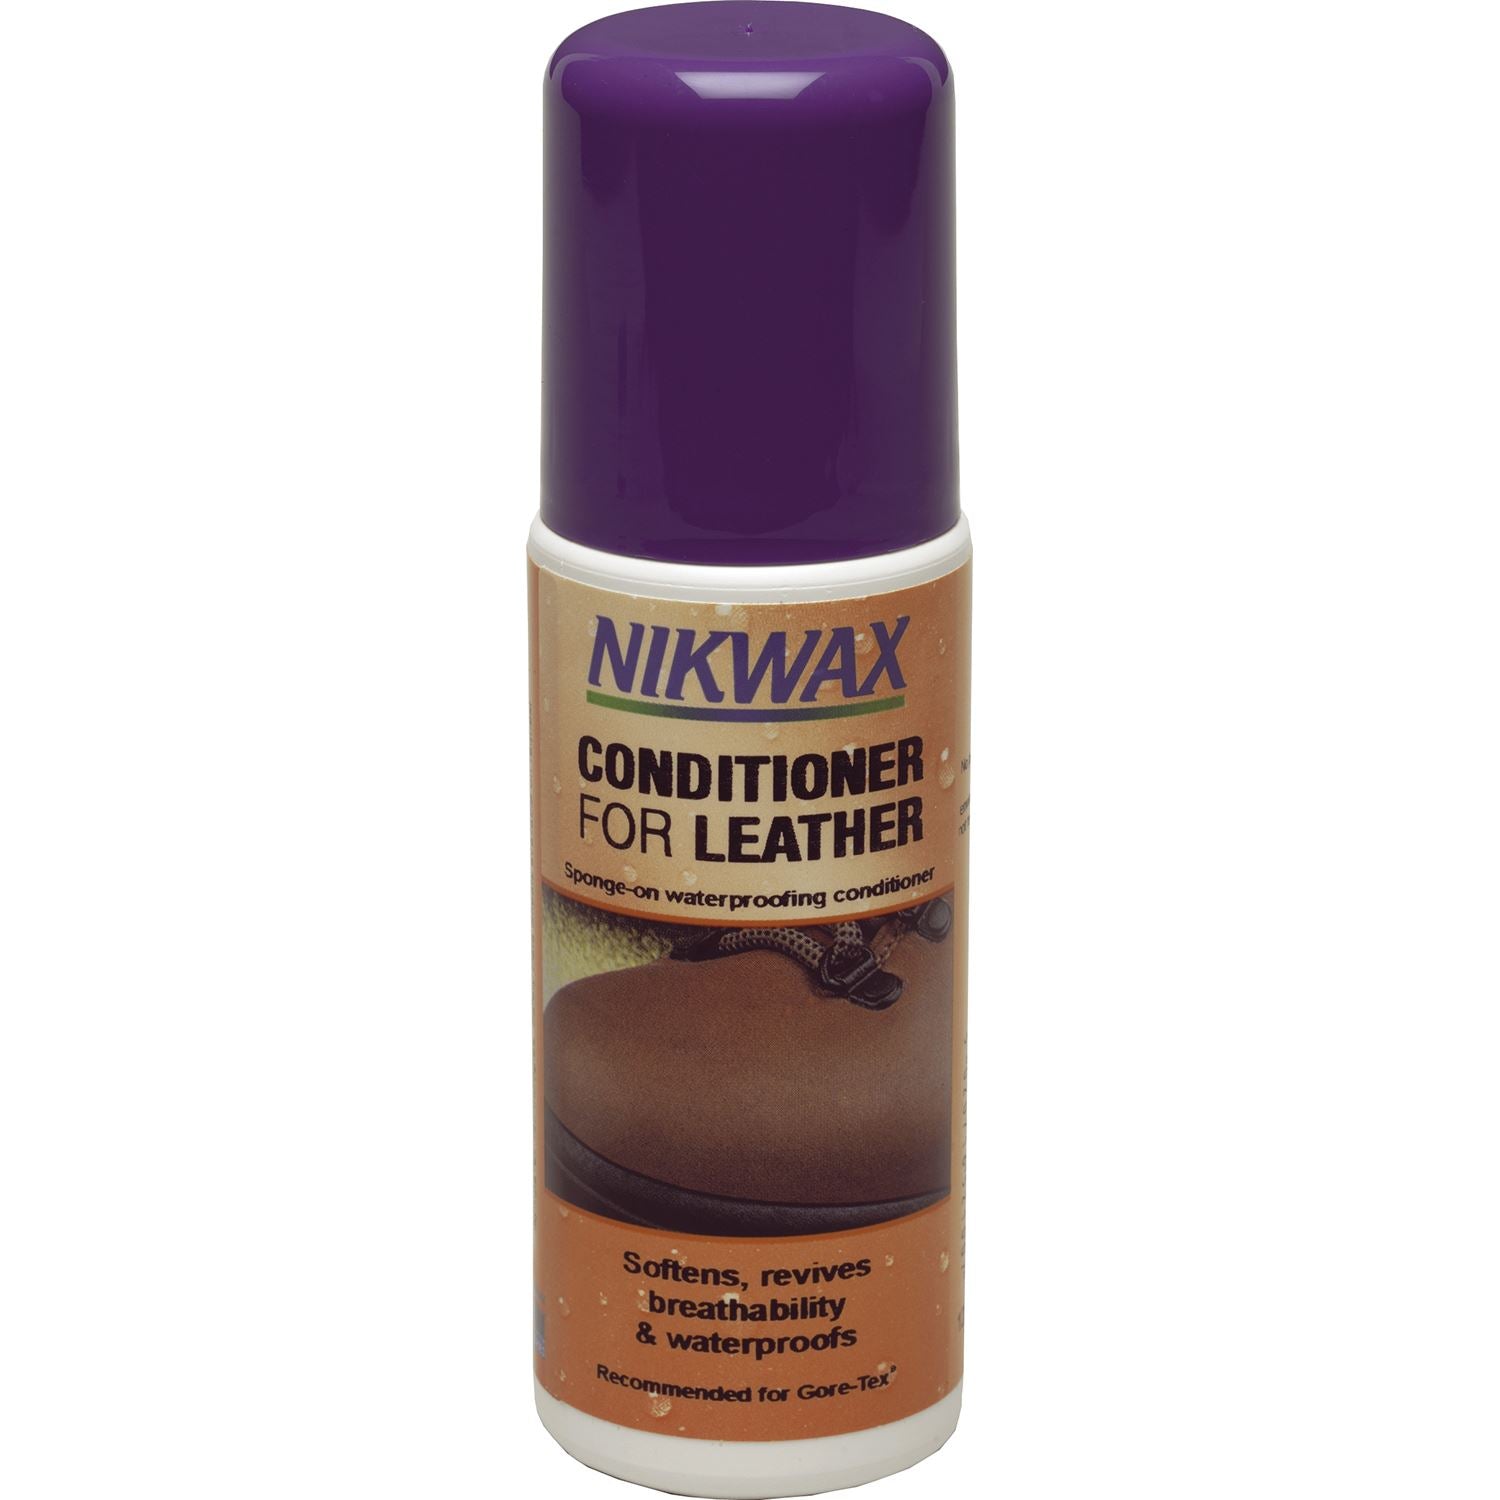 Nikwax Conditioner For Leather - Just Horse Riders